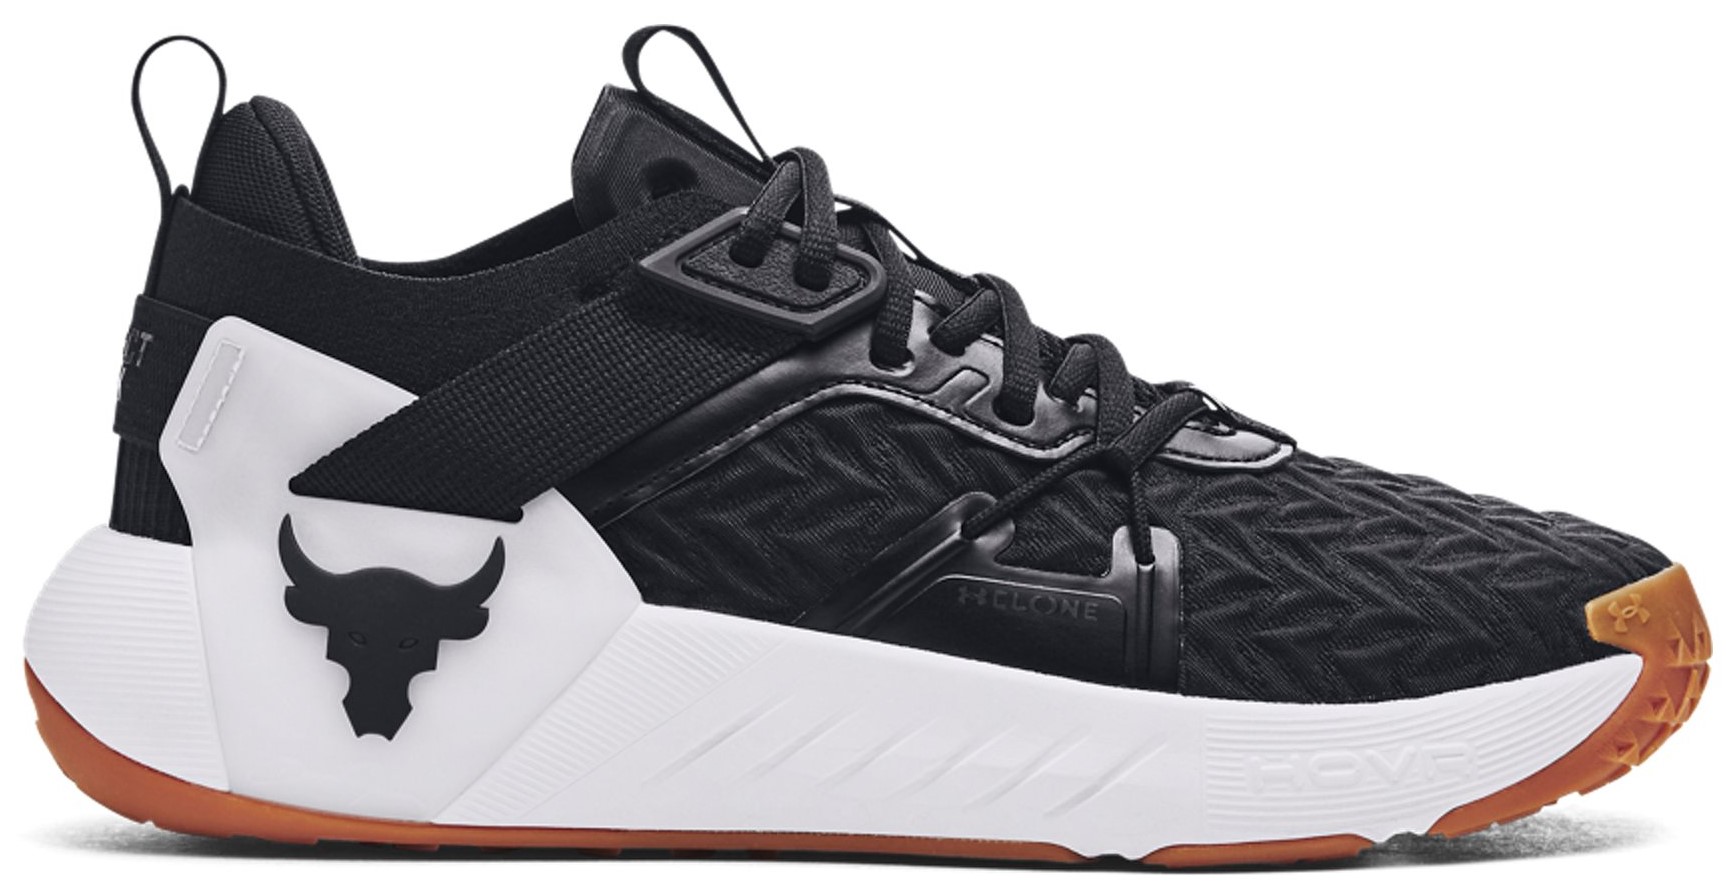 Under Armour - Project Rock 6 Sneakers